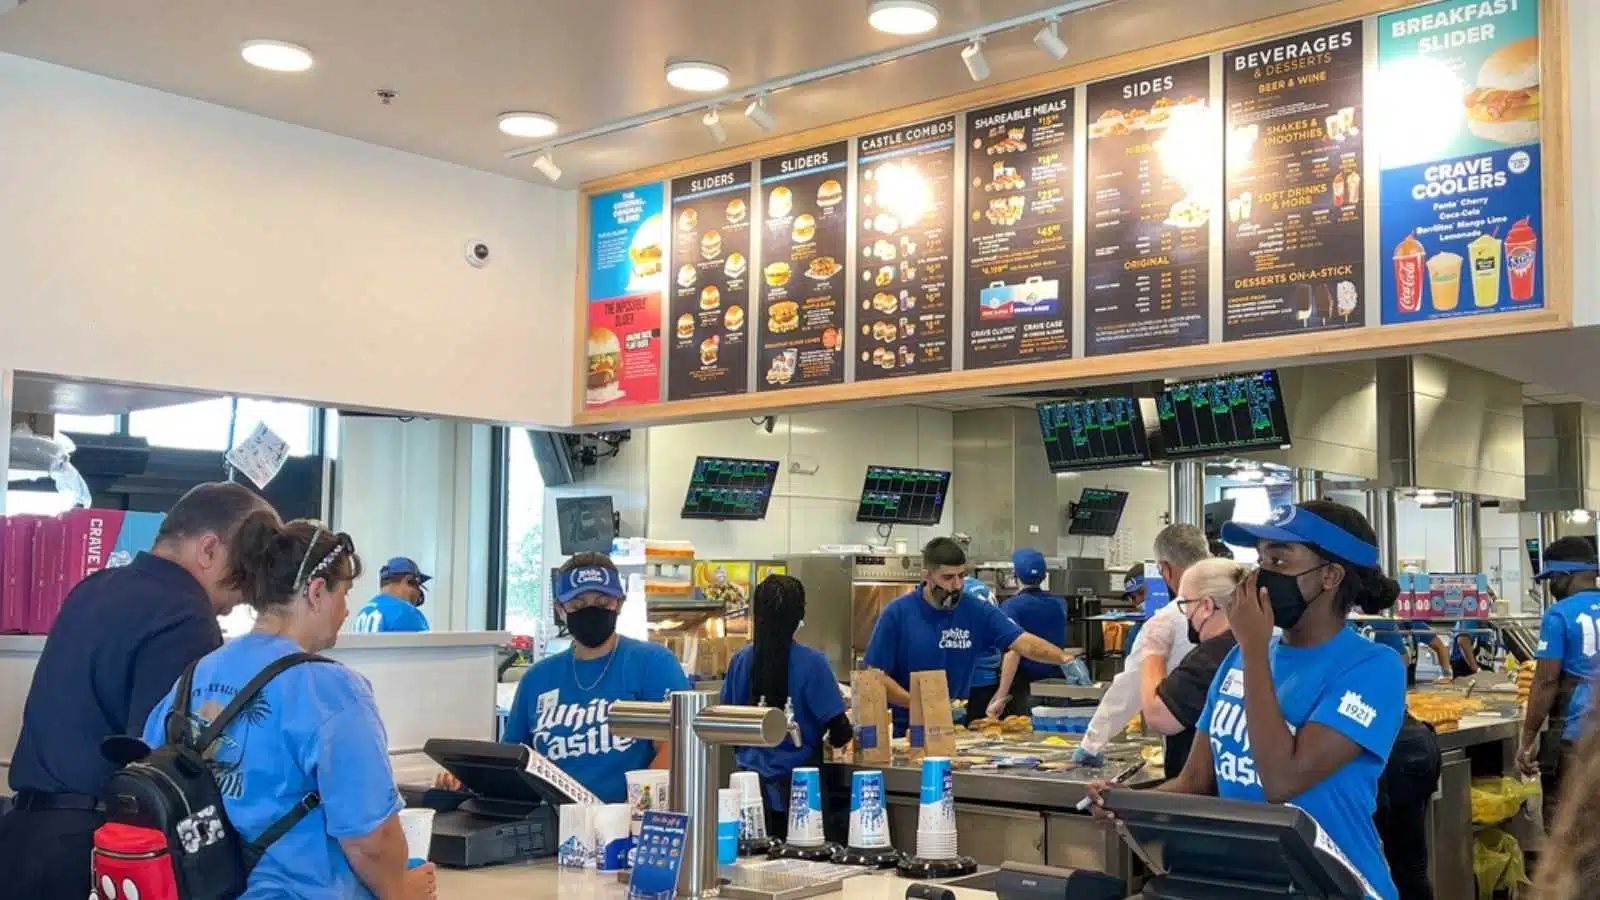 Orlando, FL USA - June 8, 2021: The interior of a White Castle fast food restaurant with employees serving food in Orlando, Florida.